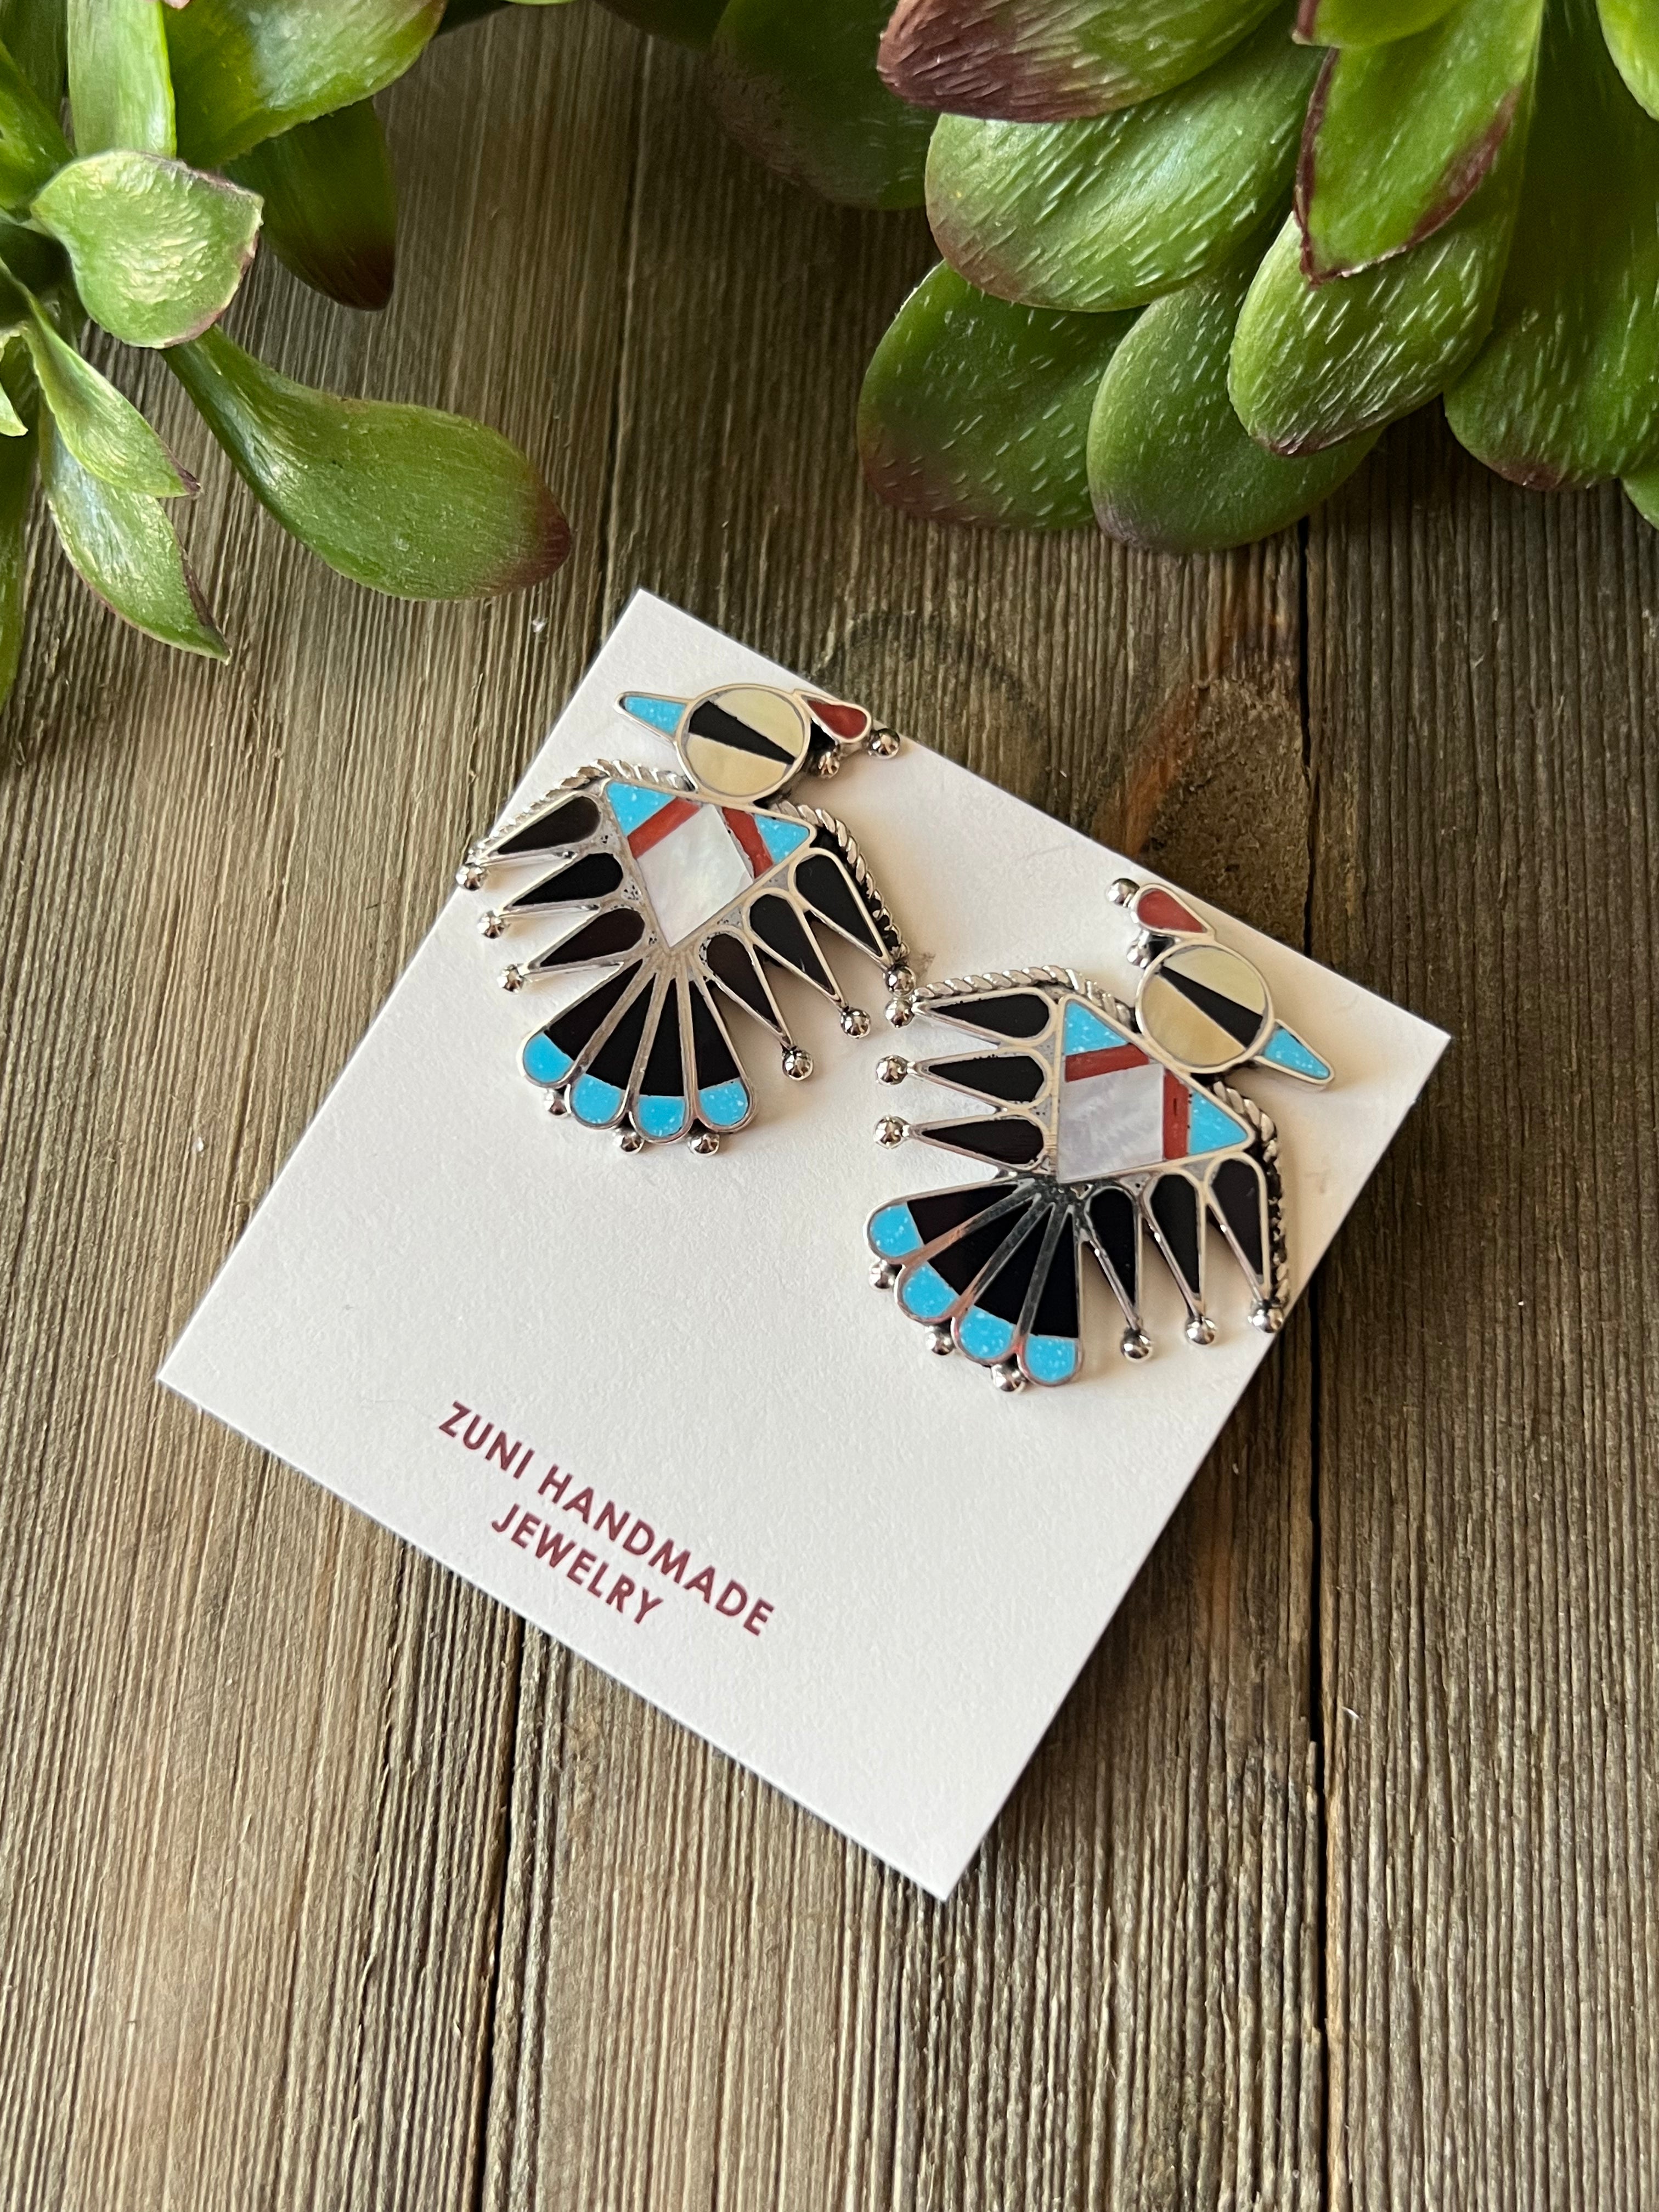 Zuni Made Multi Stone & Sterling Silver Inlay Thunderbird Post Earrings